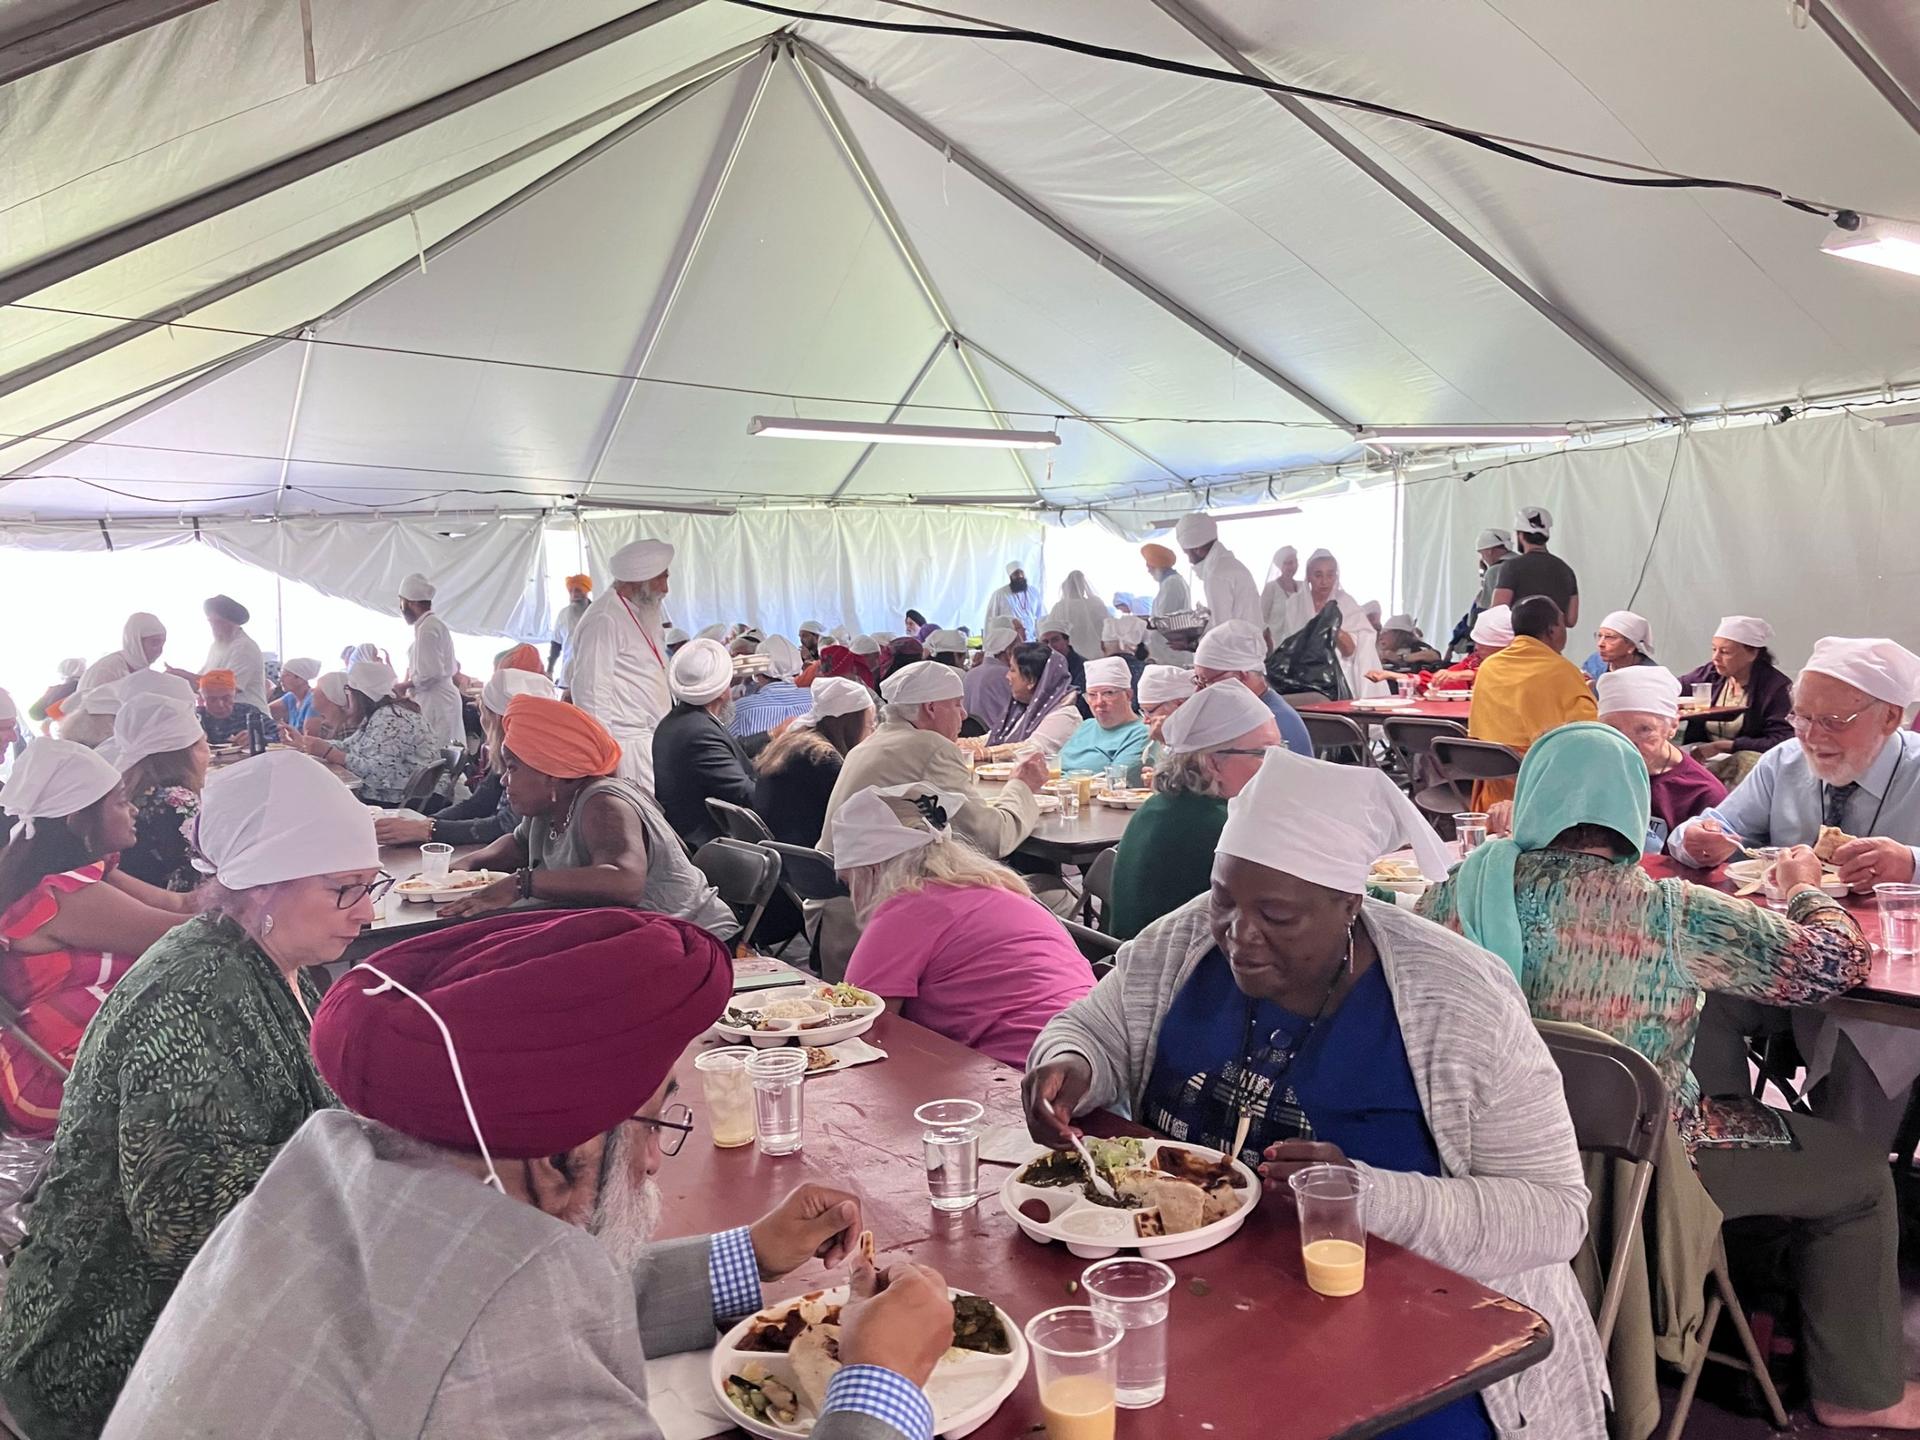 Participants enjoy langar, a free communal lunch provided by Sikhs, which they consider a devotional service.